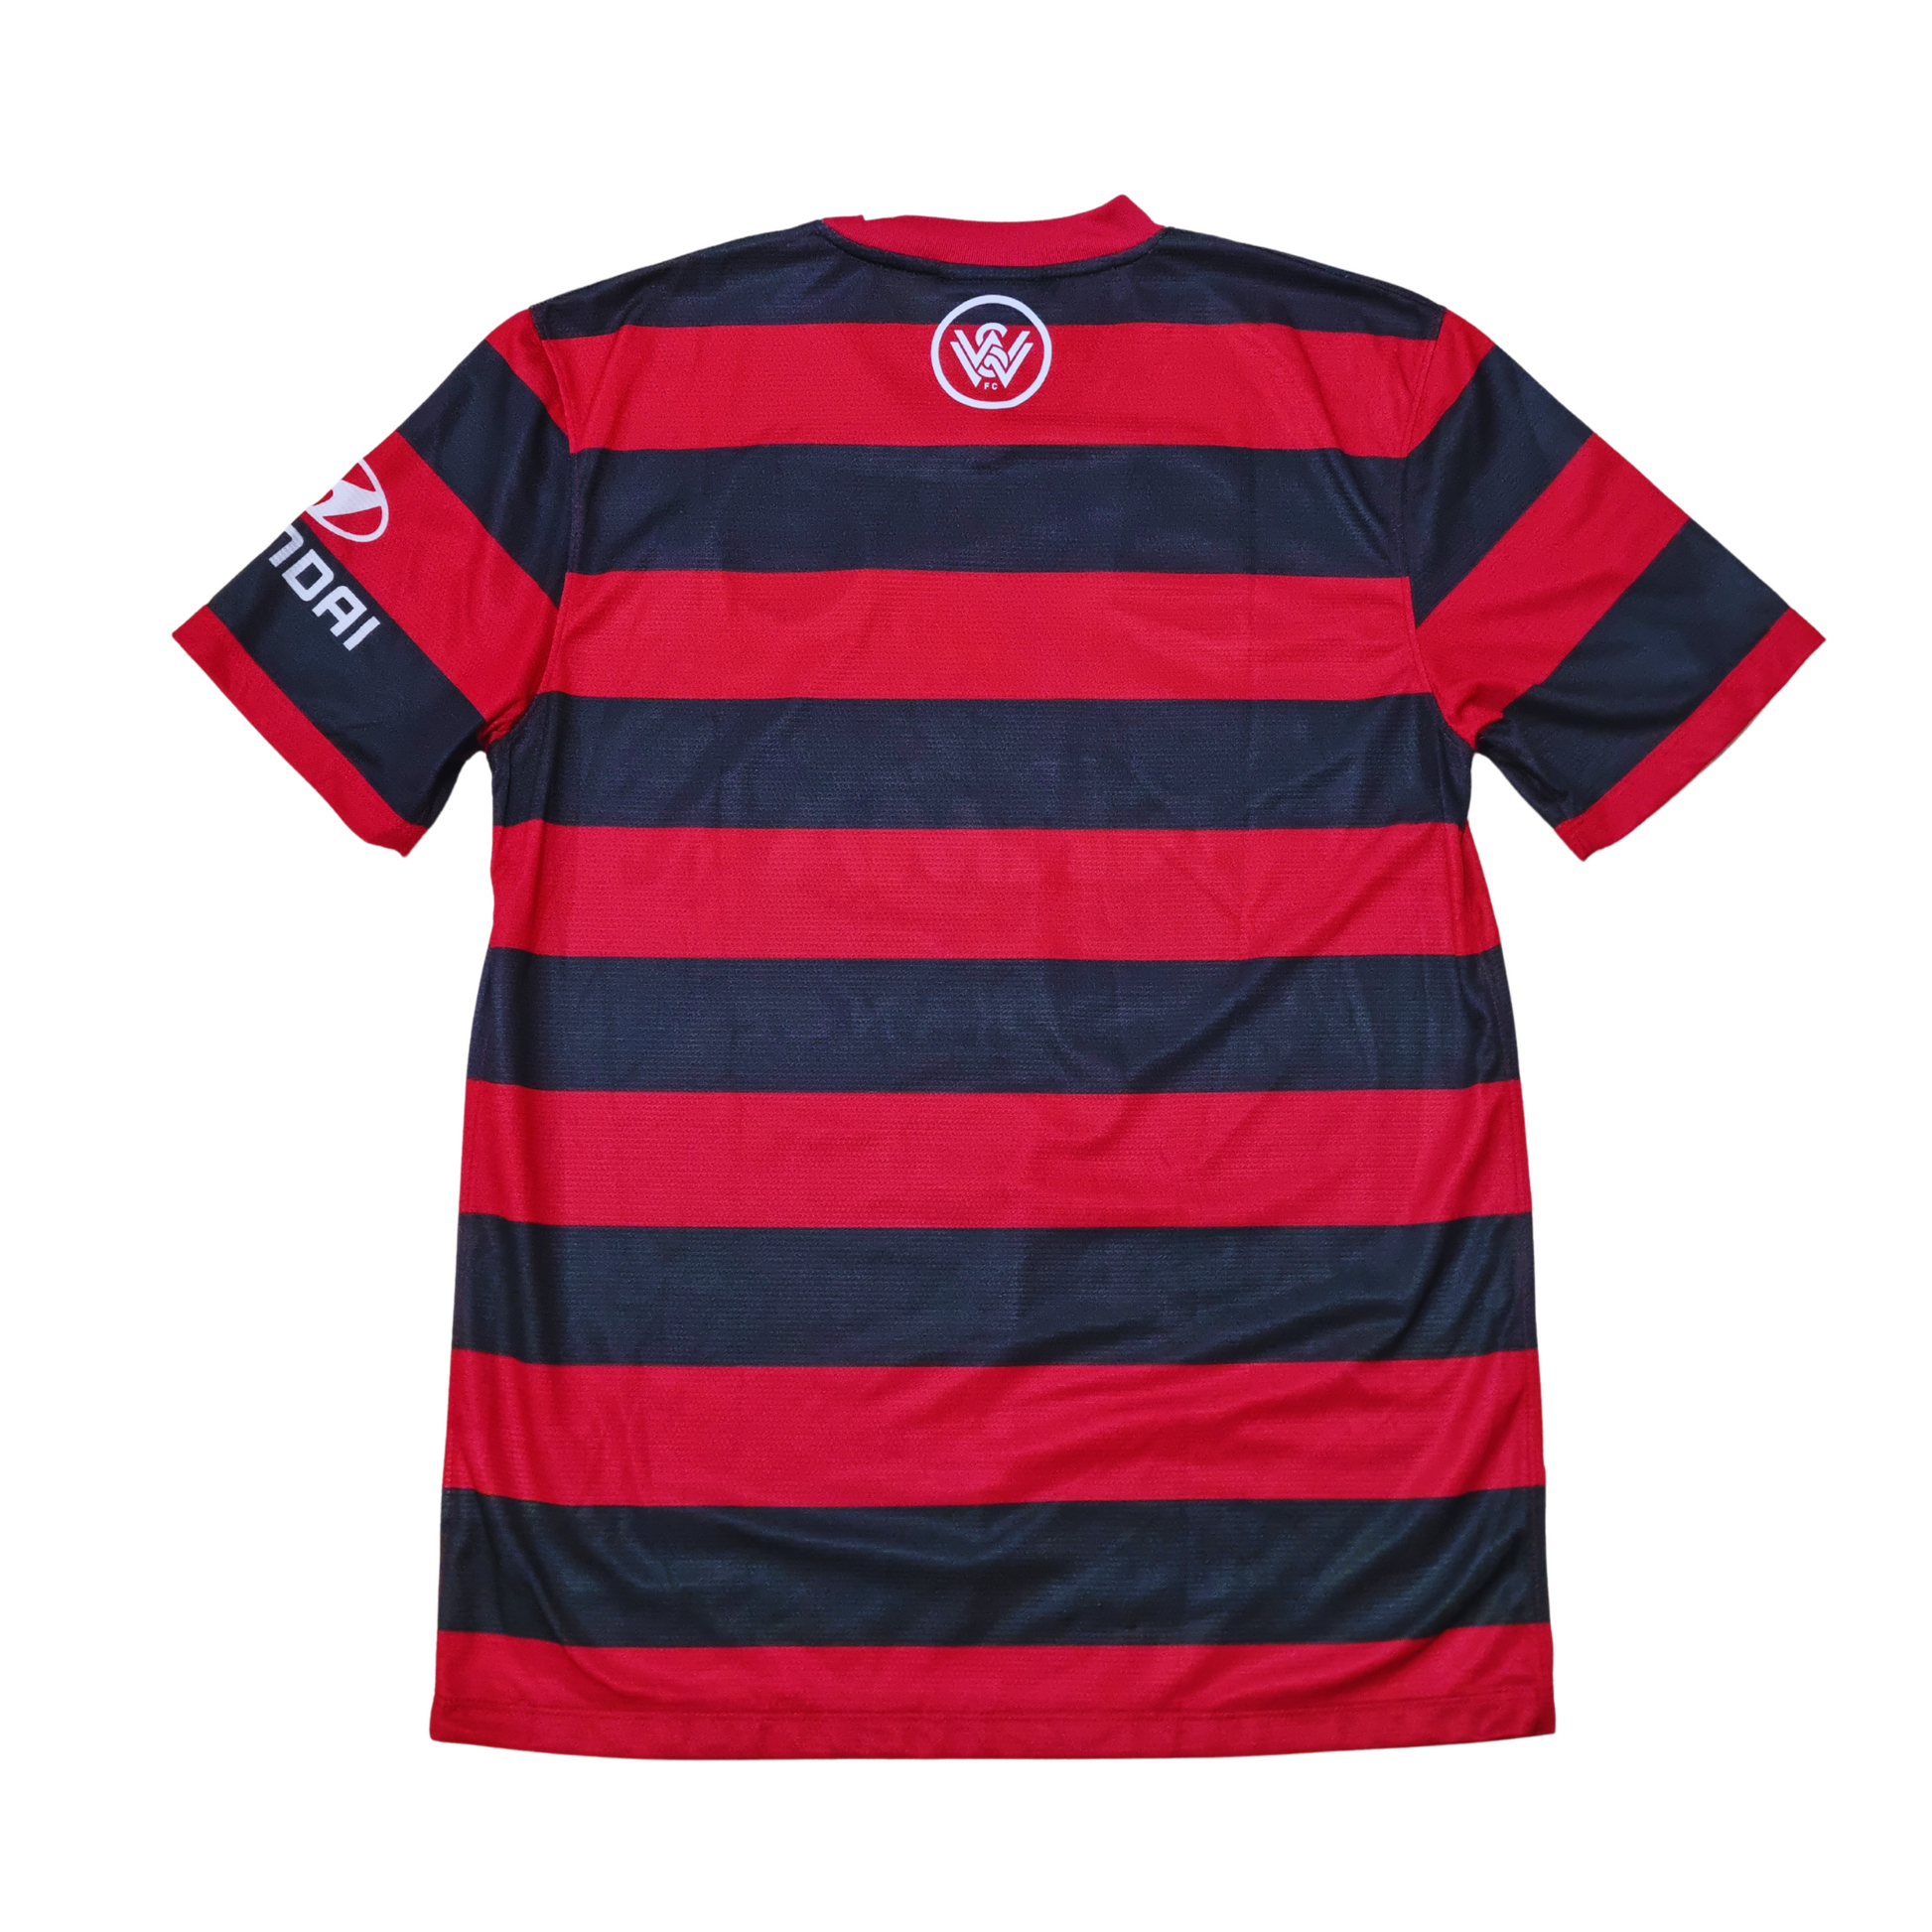 WS Wanderers 2013/14 Home Jersey Back | Upcycled Locker